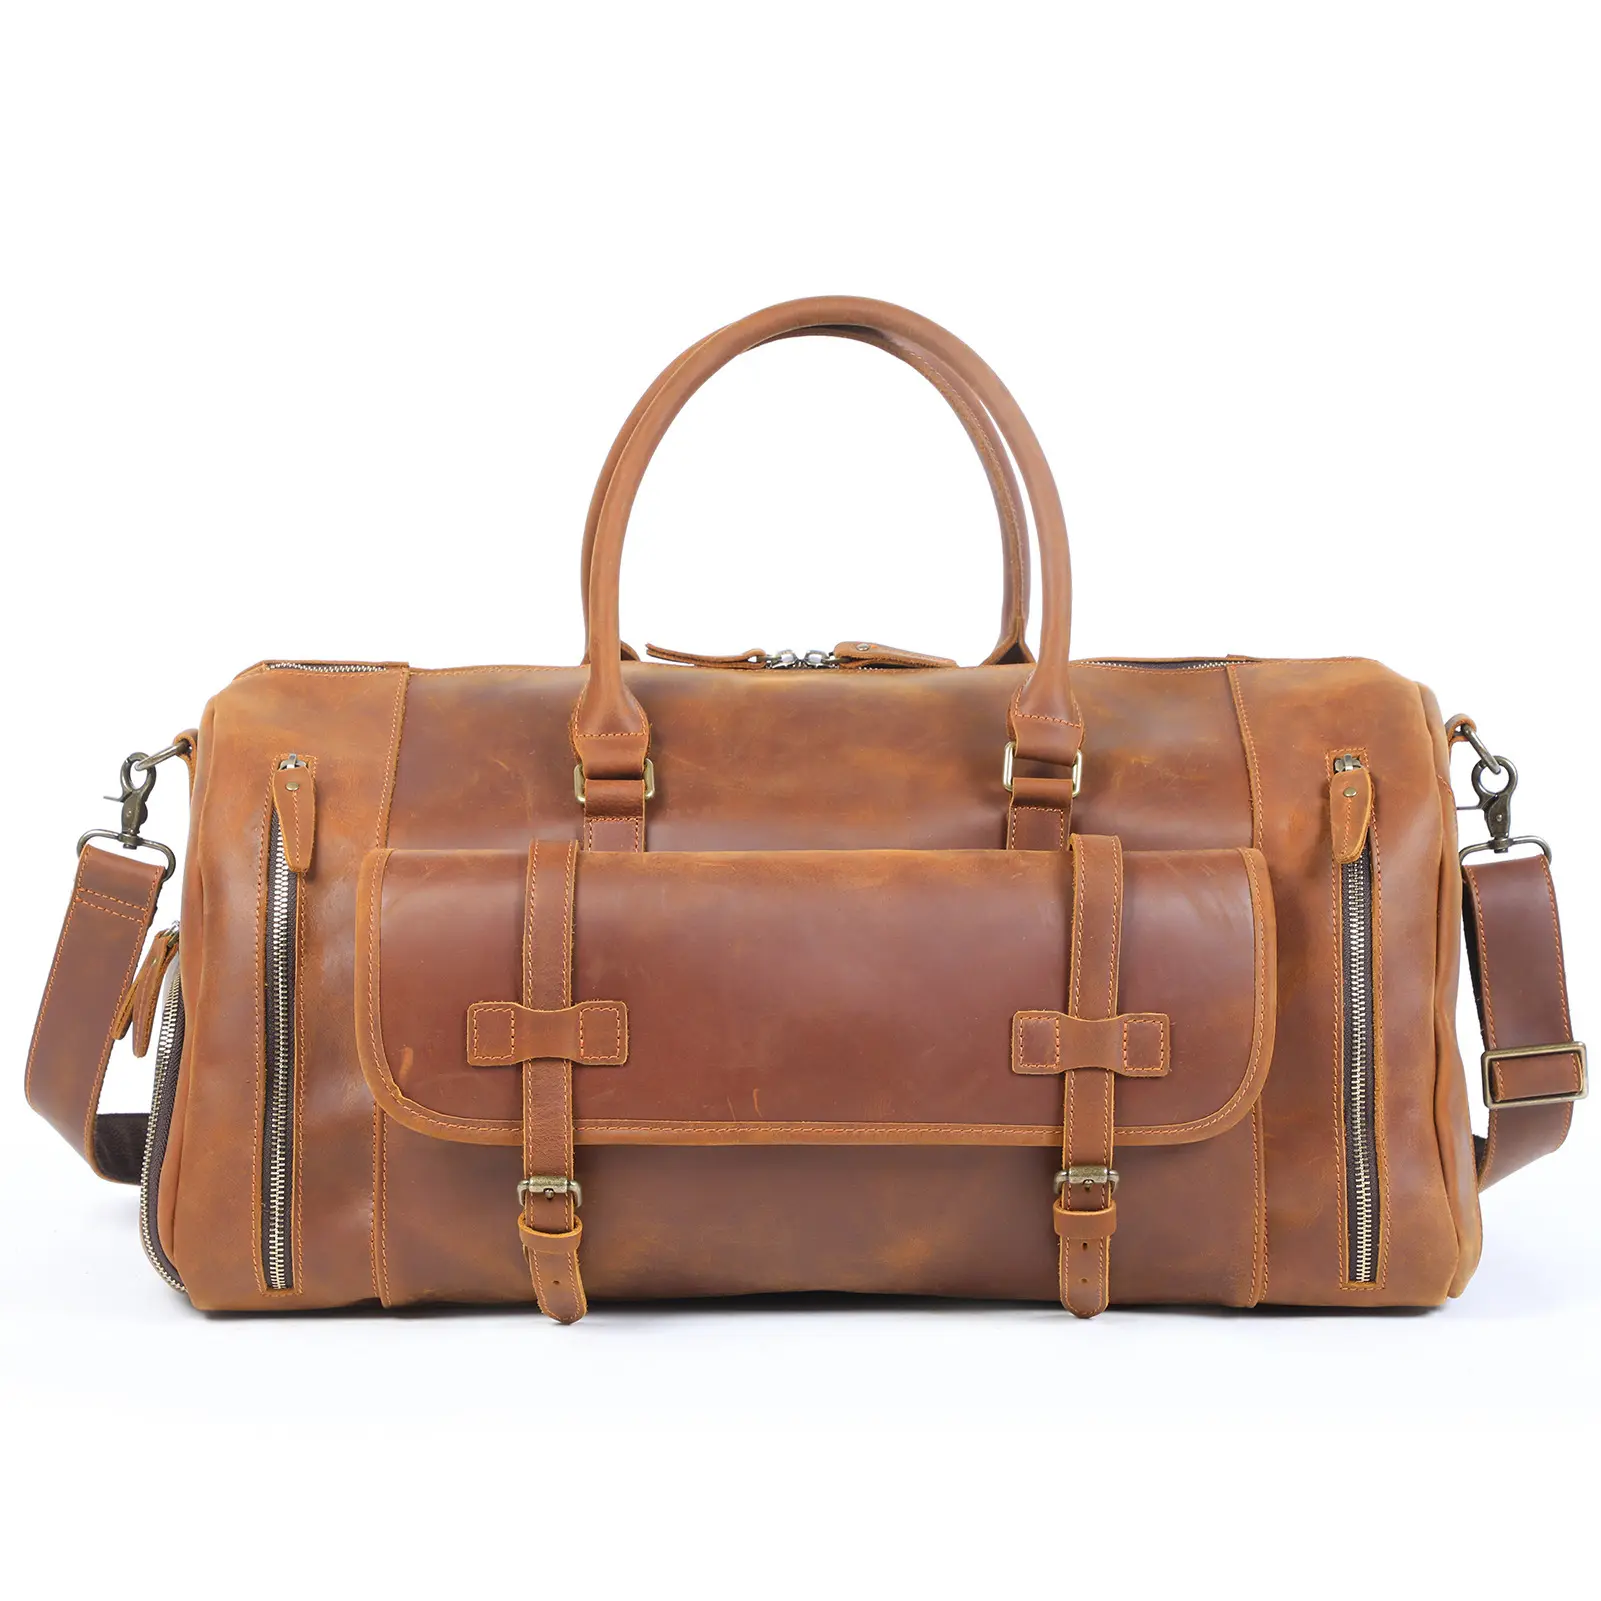 Luxury Real Leather Carry-On Weekend Business Gym Travel Duffel Bags Luggage Handbags for Men